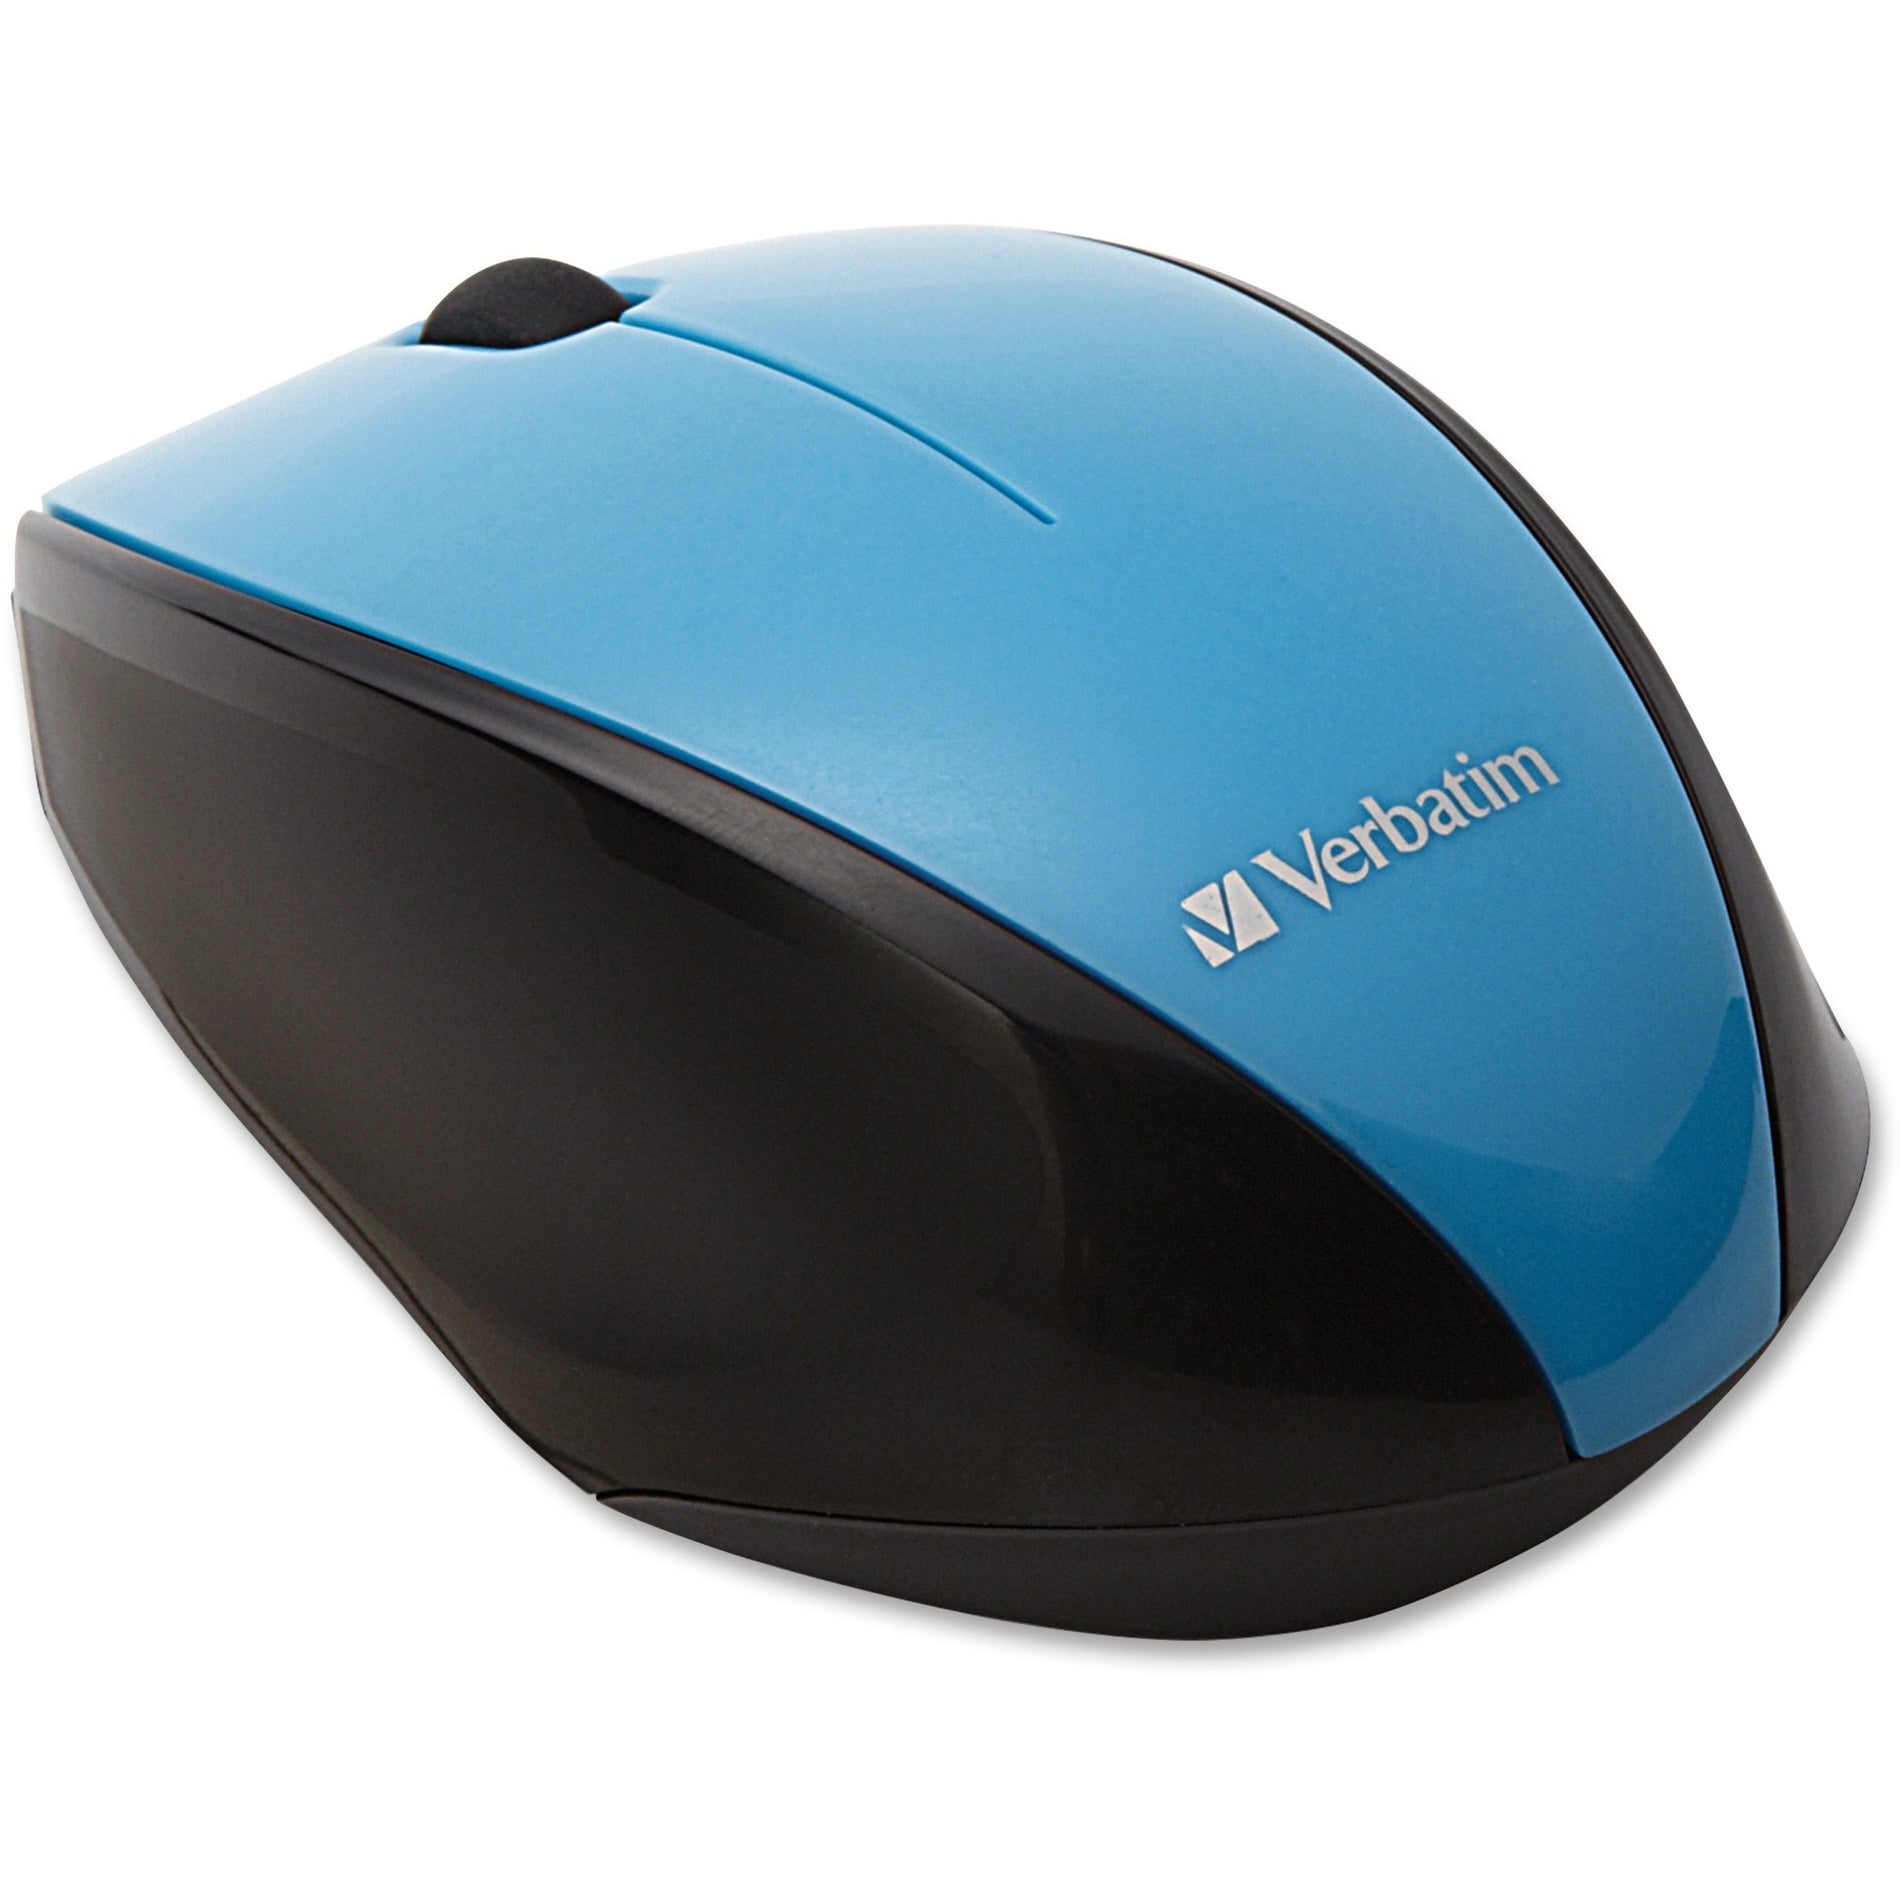 Verbatim 97993 Wireless Multi-trac LED Optical Mouse, Blue - Reliable and Ergonomic Computer Mouse with Blue LED Technology